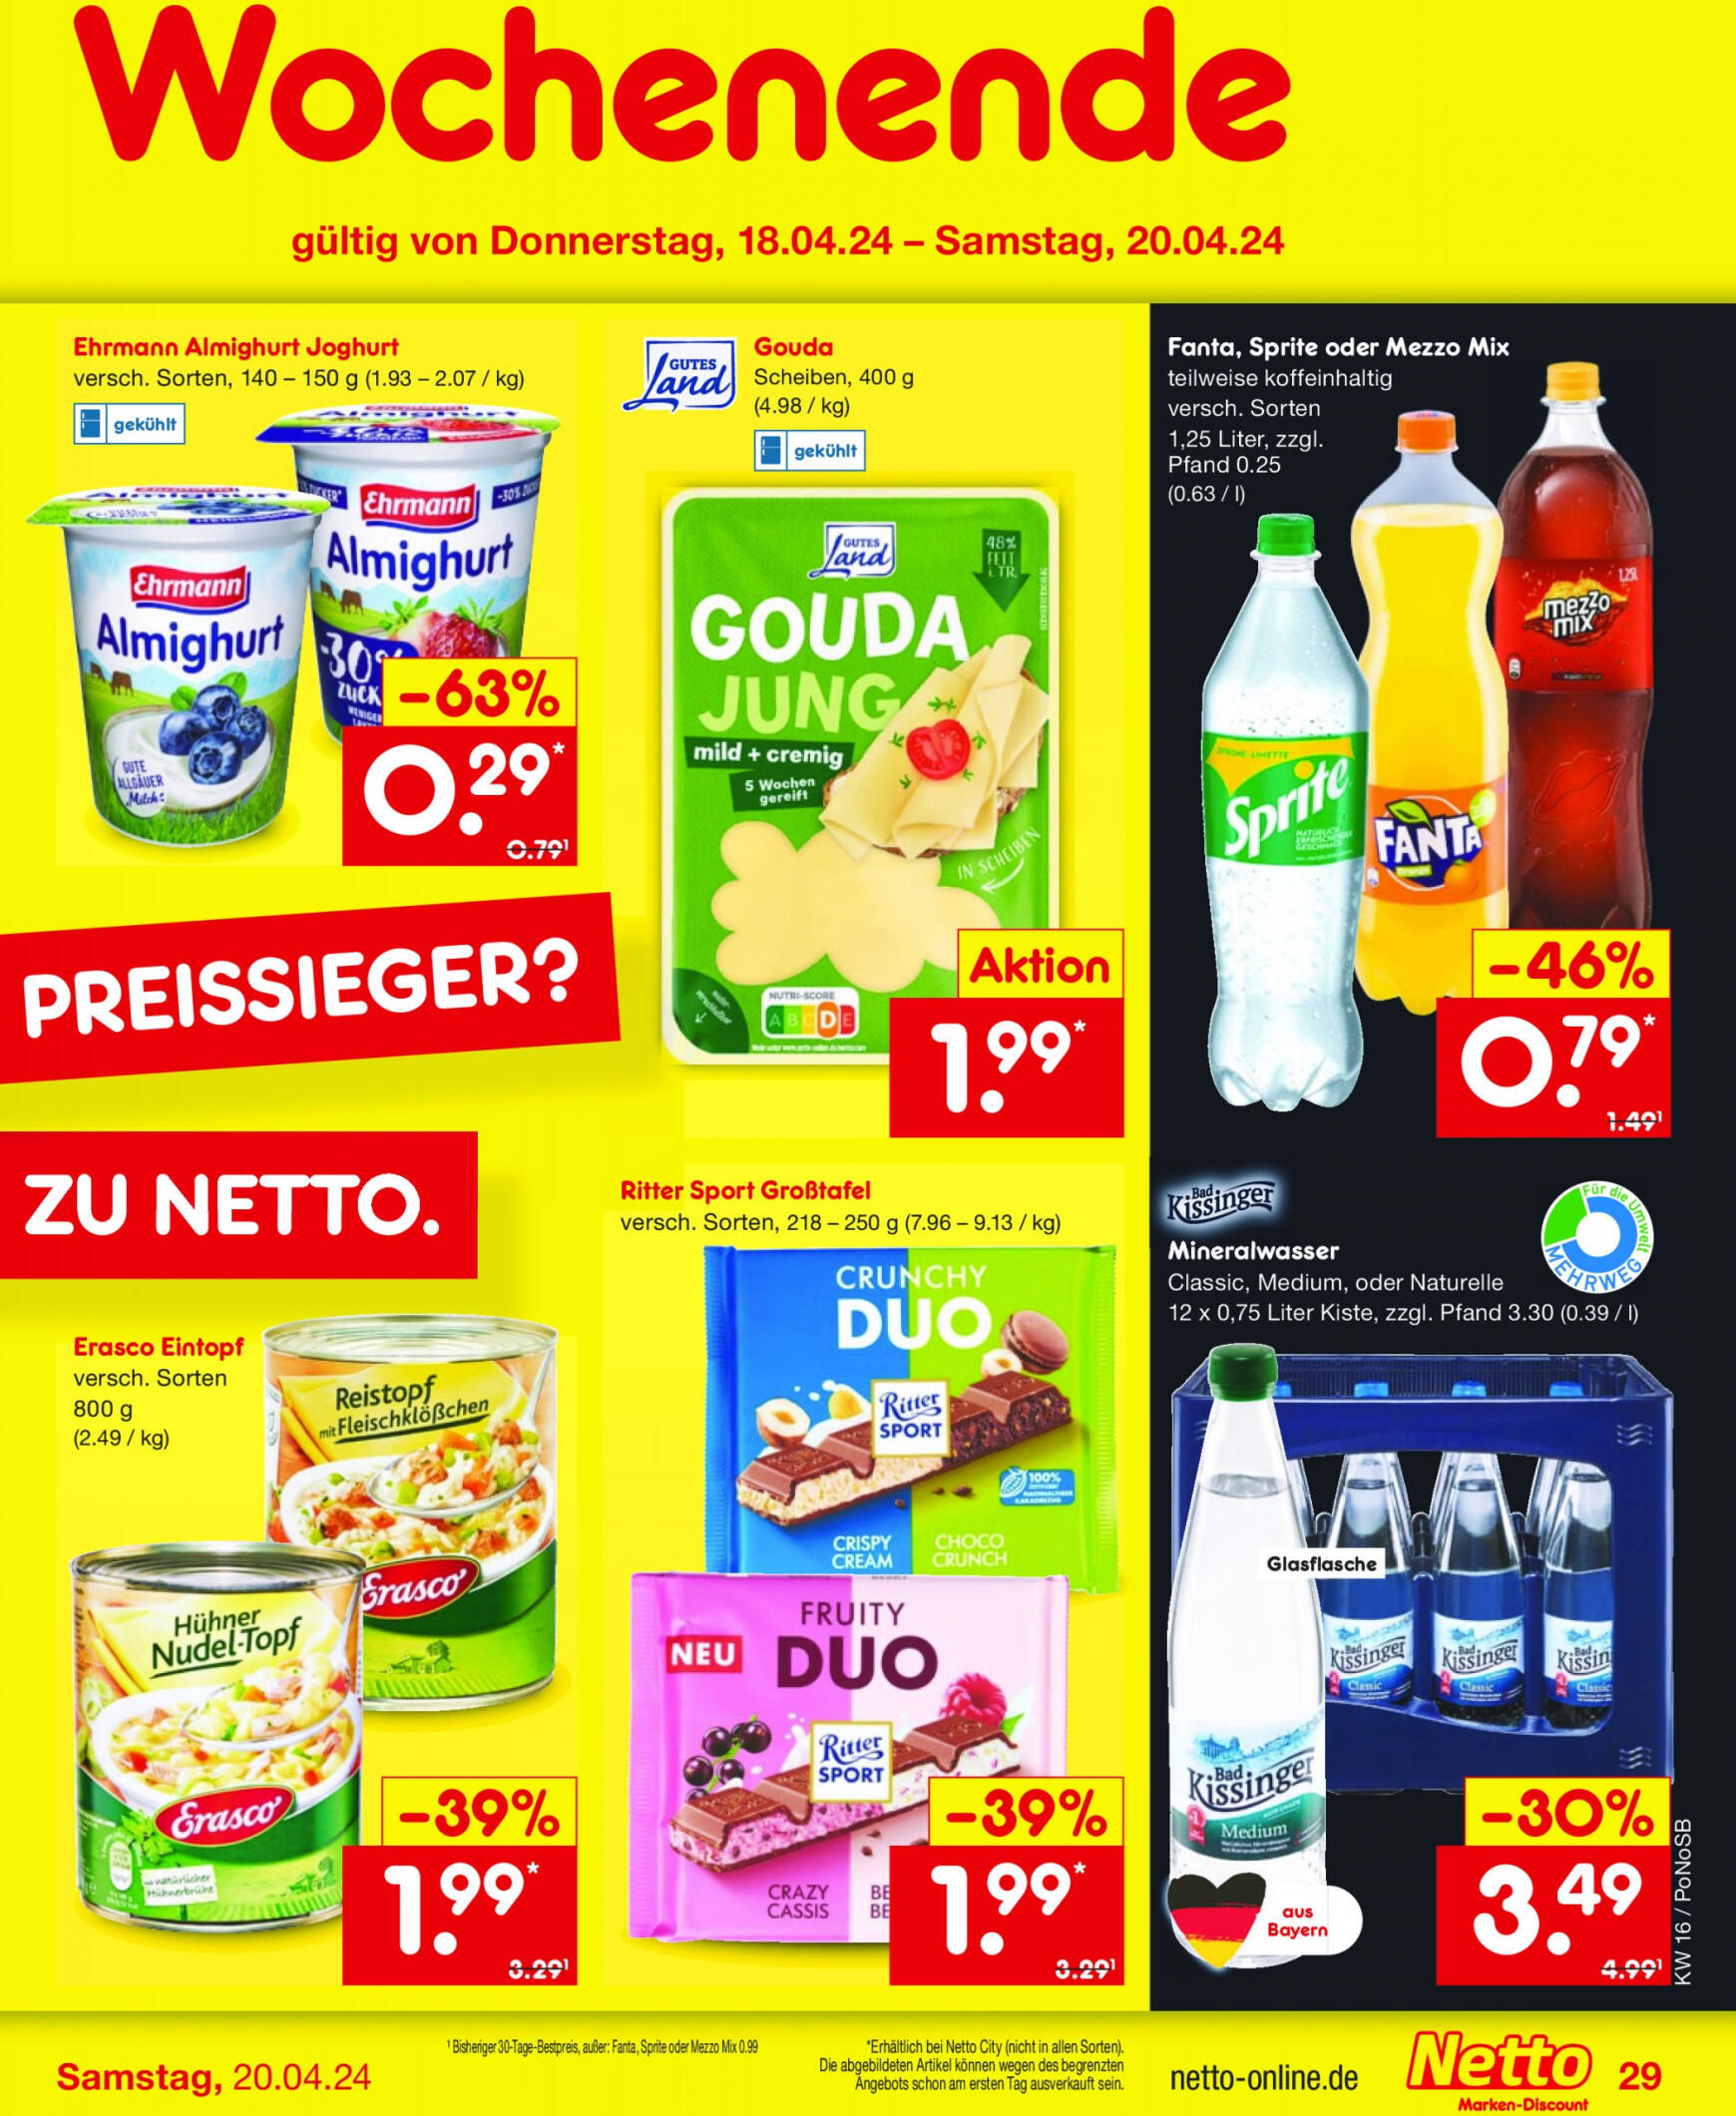 netto - Flyer Netto aktuell 15.04. - 20.04. - page: 35